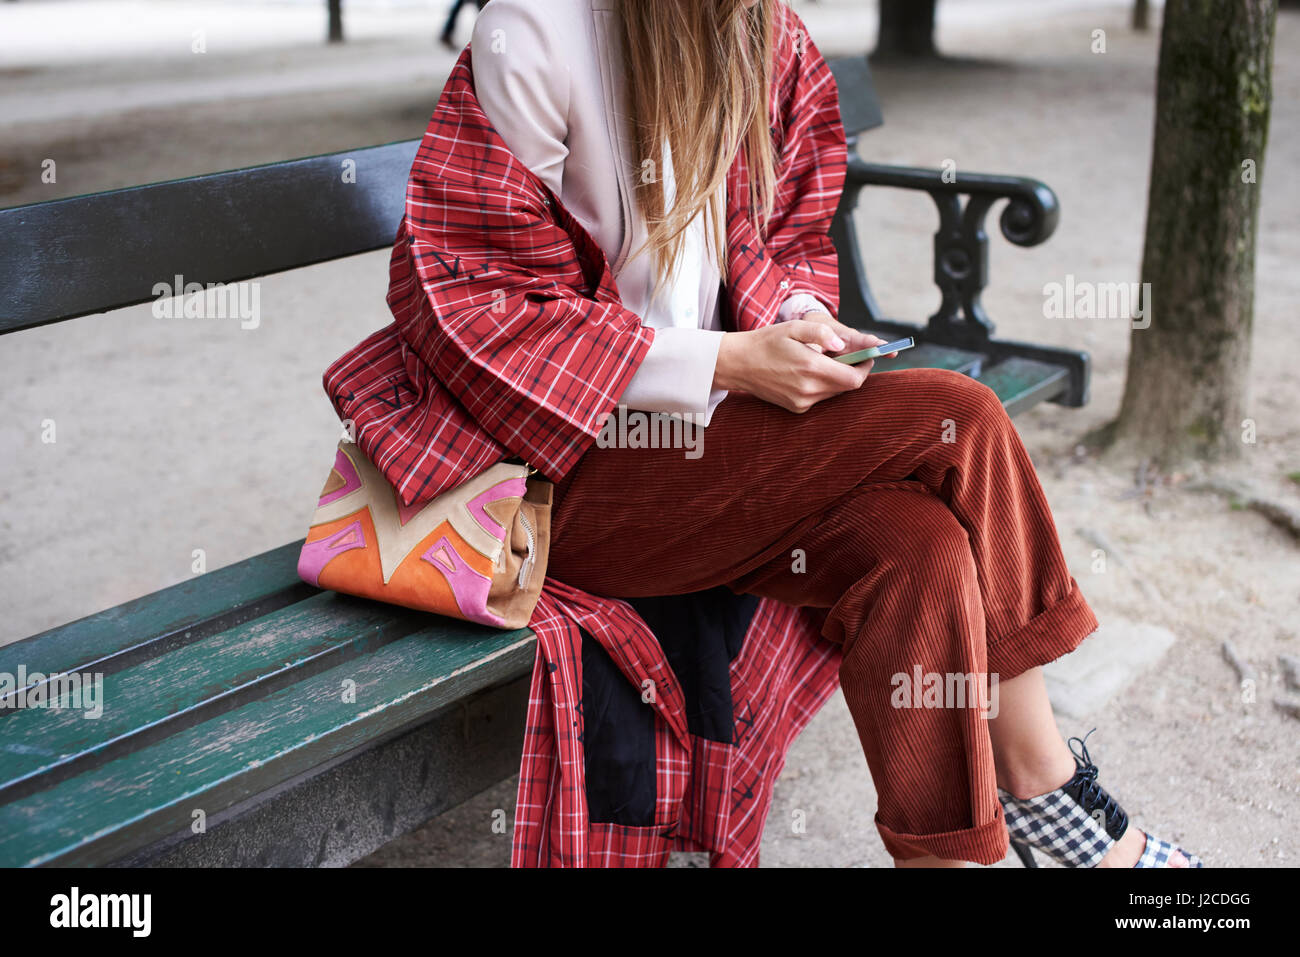 Fashionable woman sitting on bench using phone, crop Stock Photo